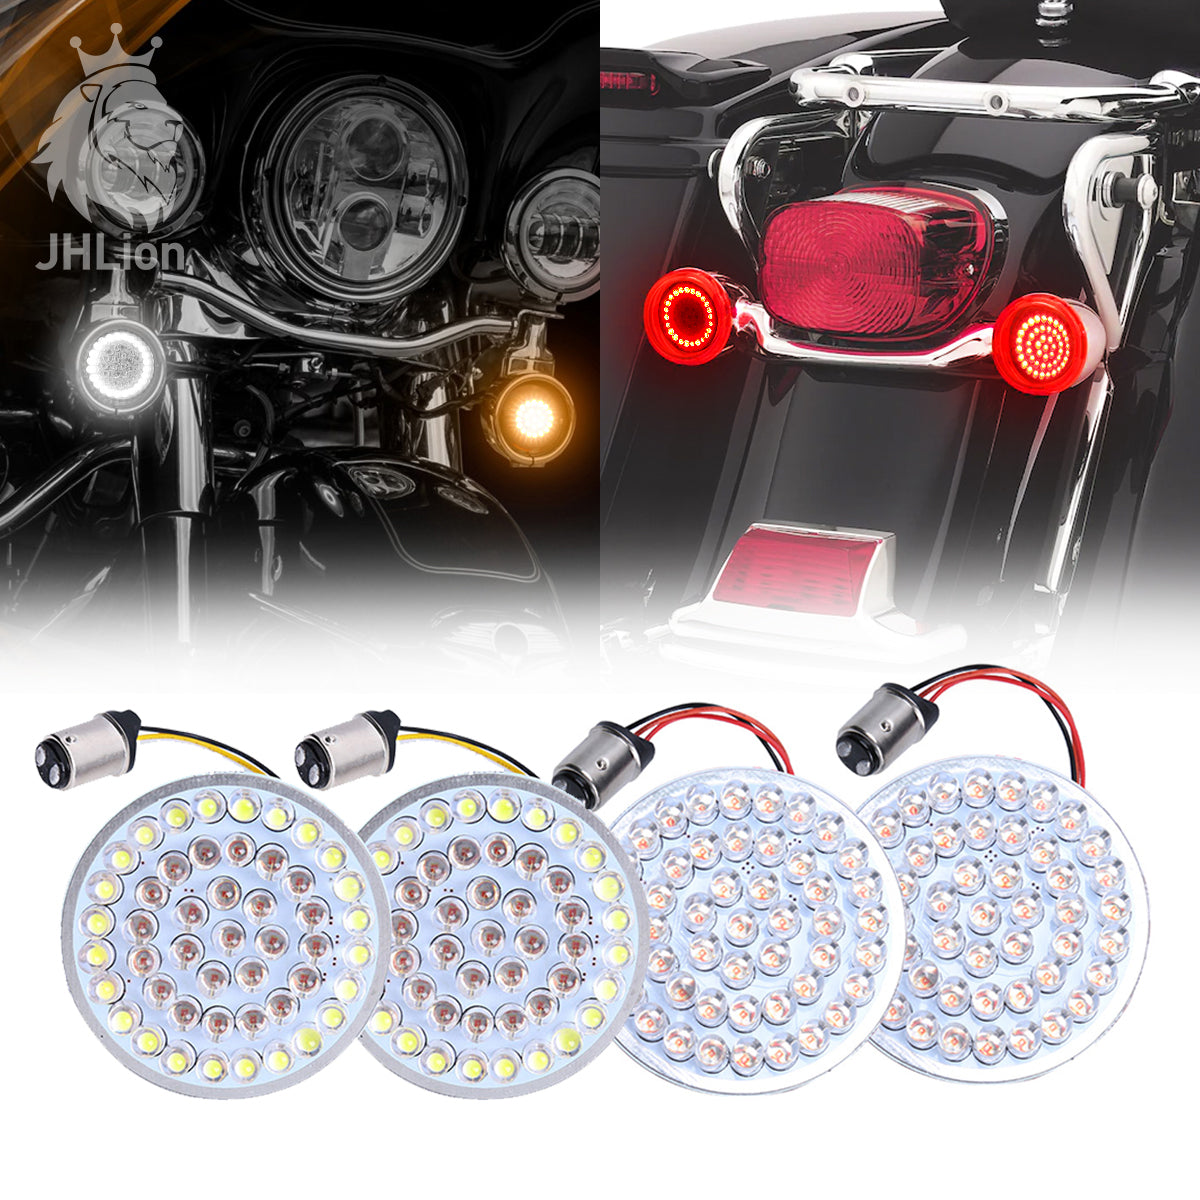 Bullet Style Amber Turn Signal Light White Running Light Panel 2 PCS Smoke Lens Cover Amazicha 1157 2” LED Turn Signals Inserts Compatible for Harley Davidson Softail Dyna Sportster Touring 